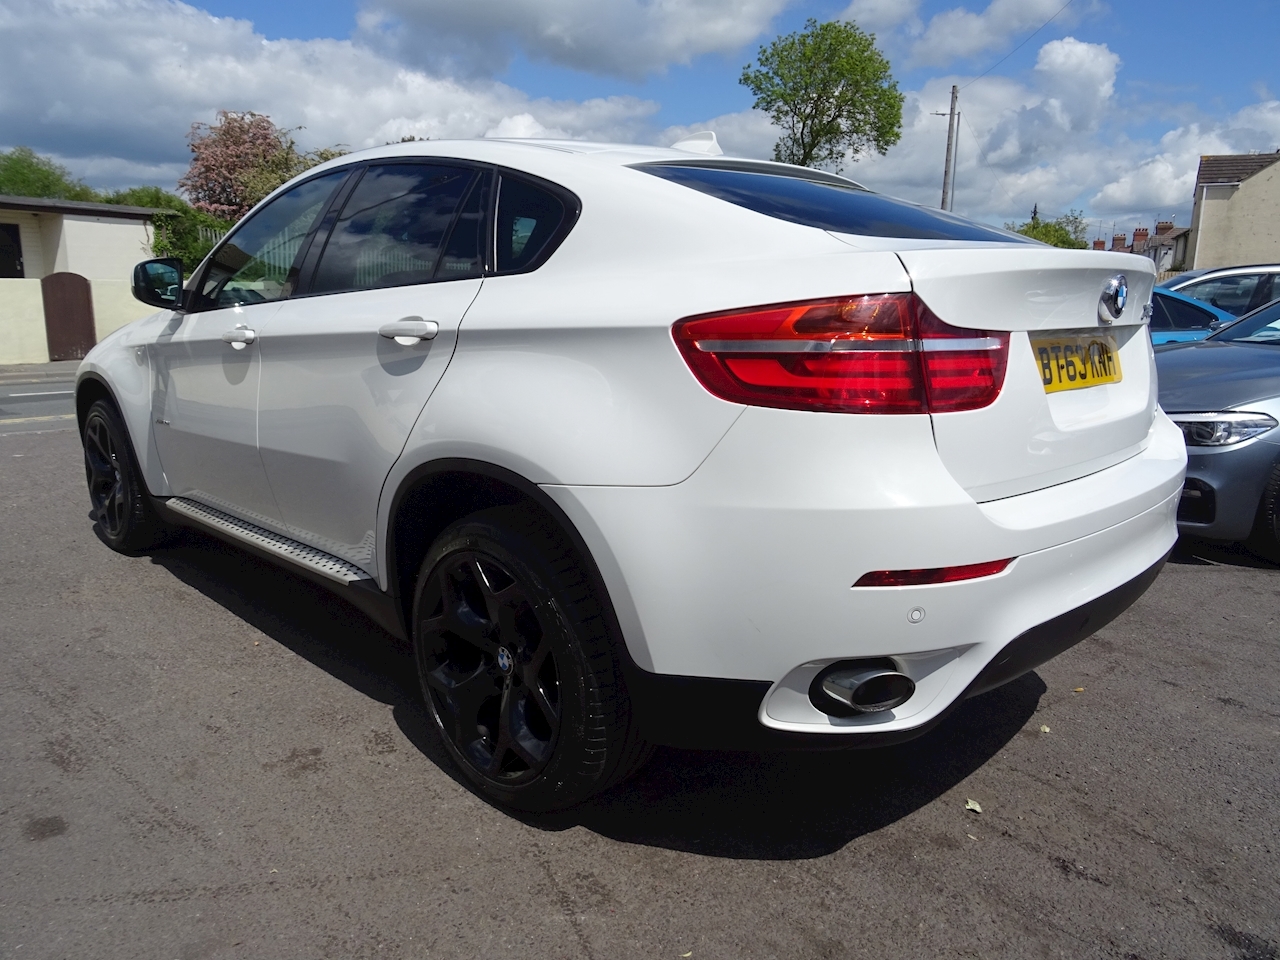 X6 Xdrive30d 3.0 5dr Coupe Automatic Diesel